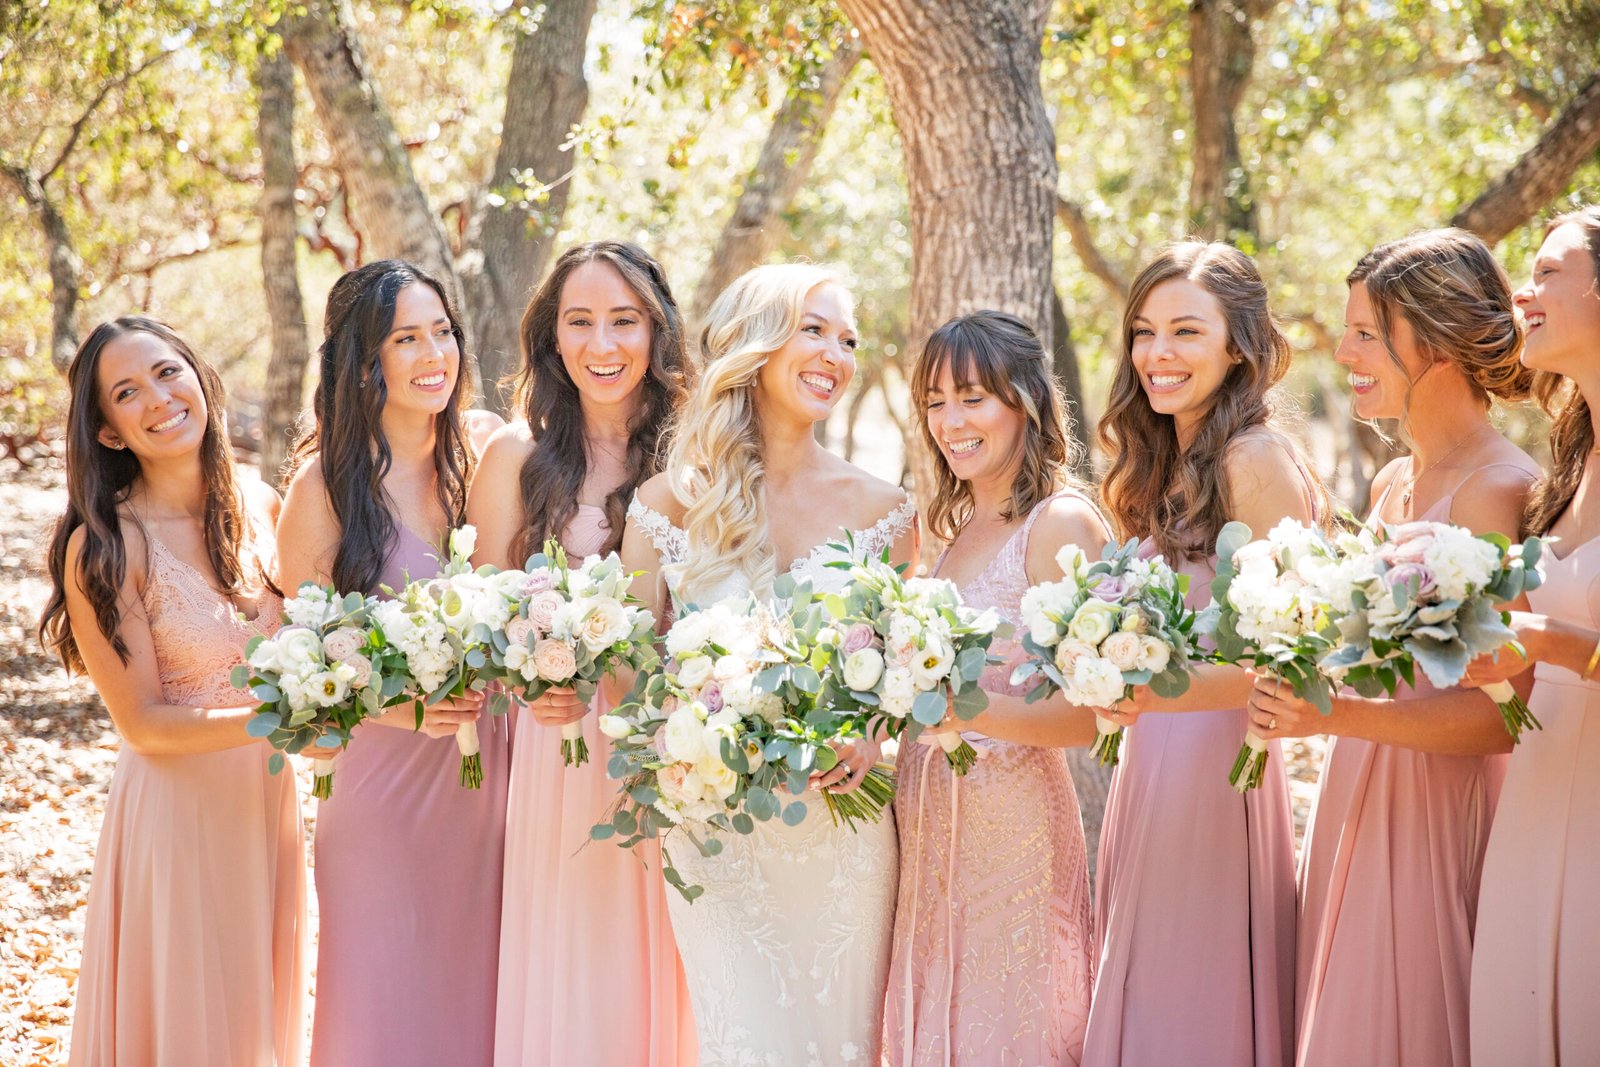 bride smiling at her bridesmaids while they all hold bouquets